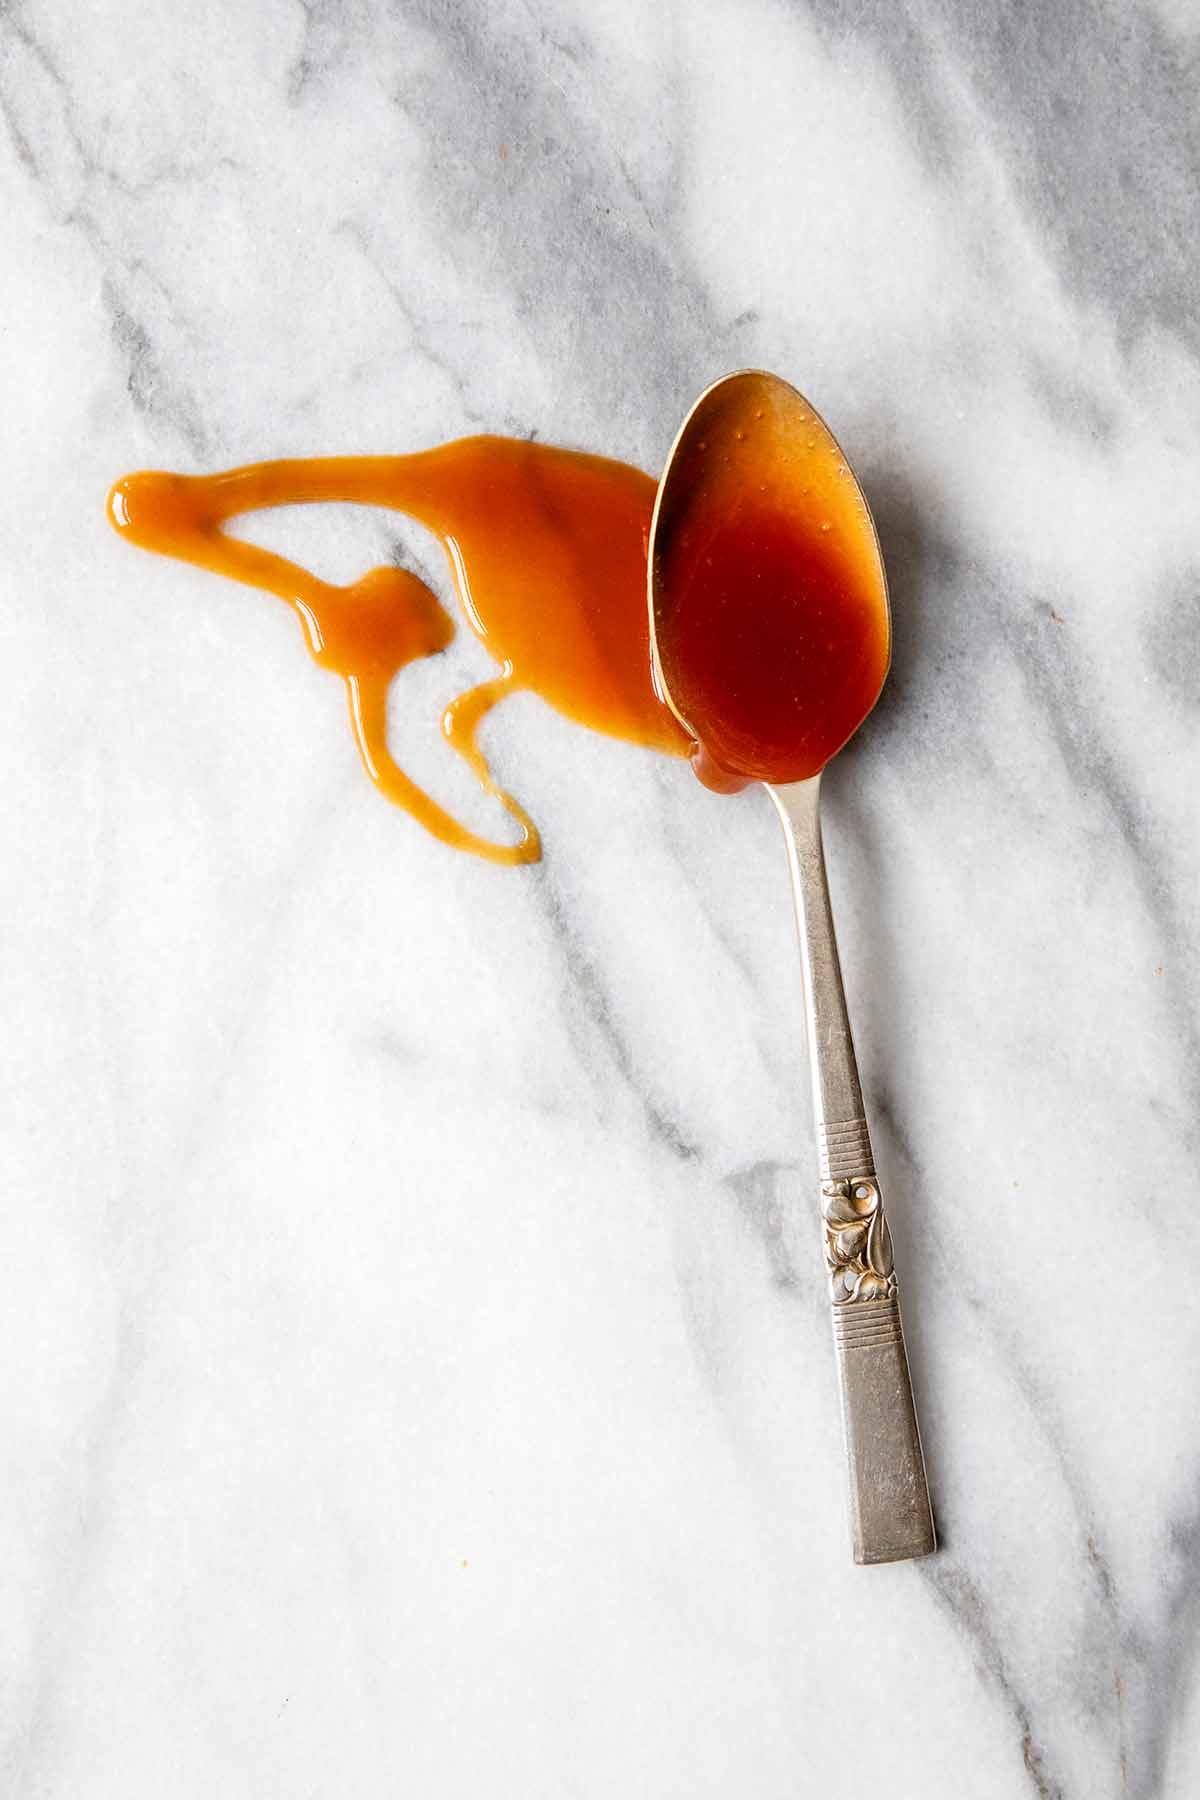 A spoonful of caramel sauce dripped onto a marble surface.